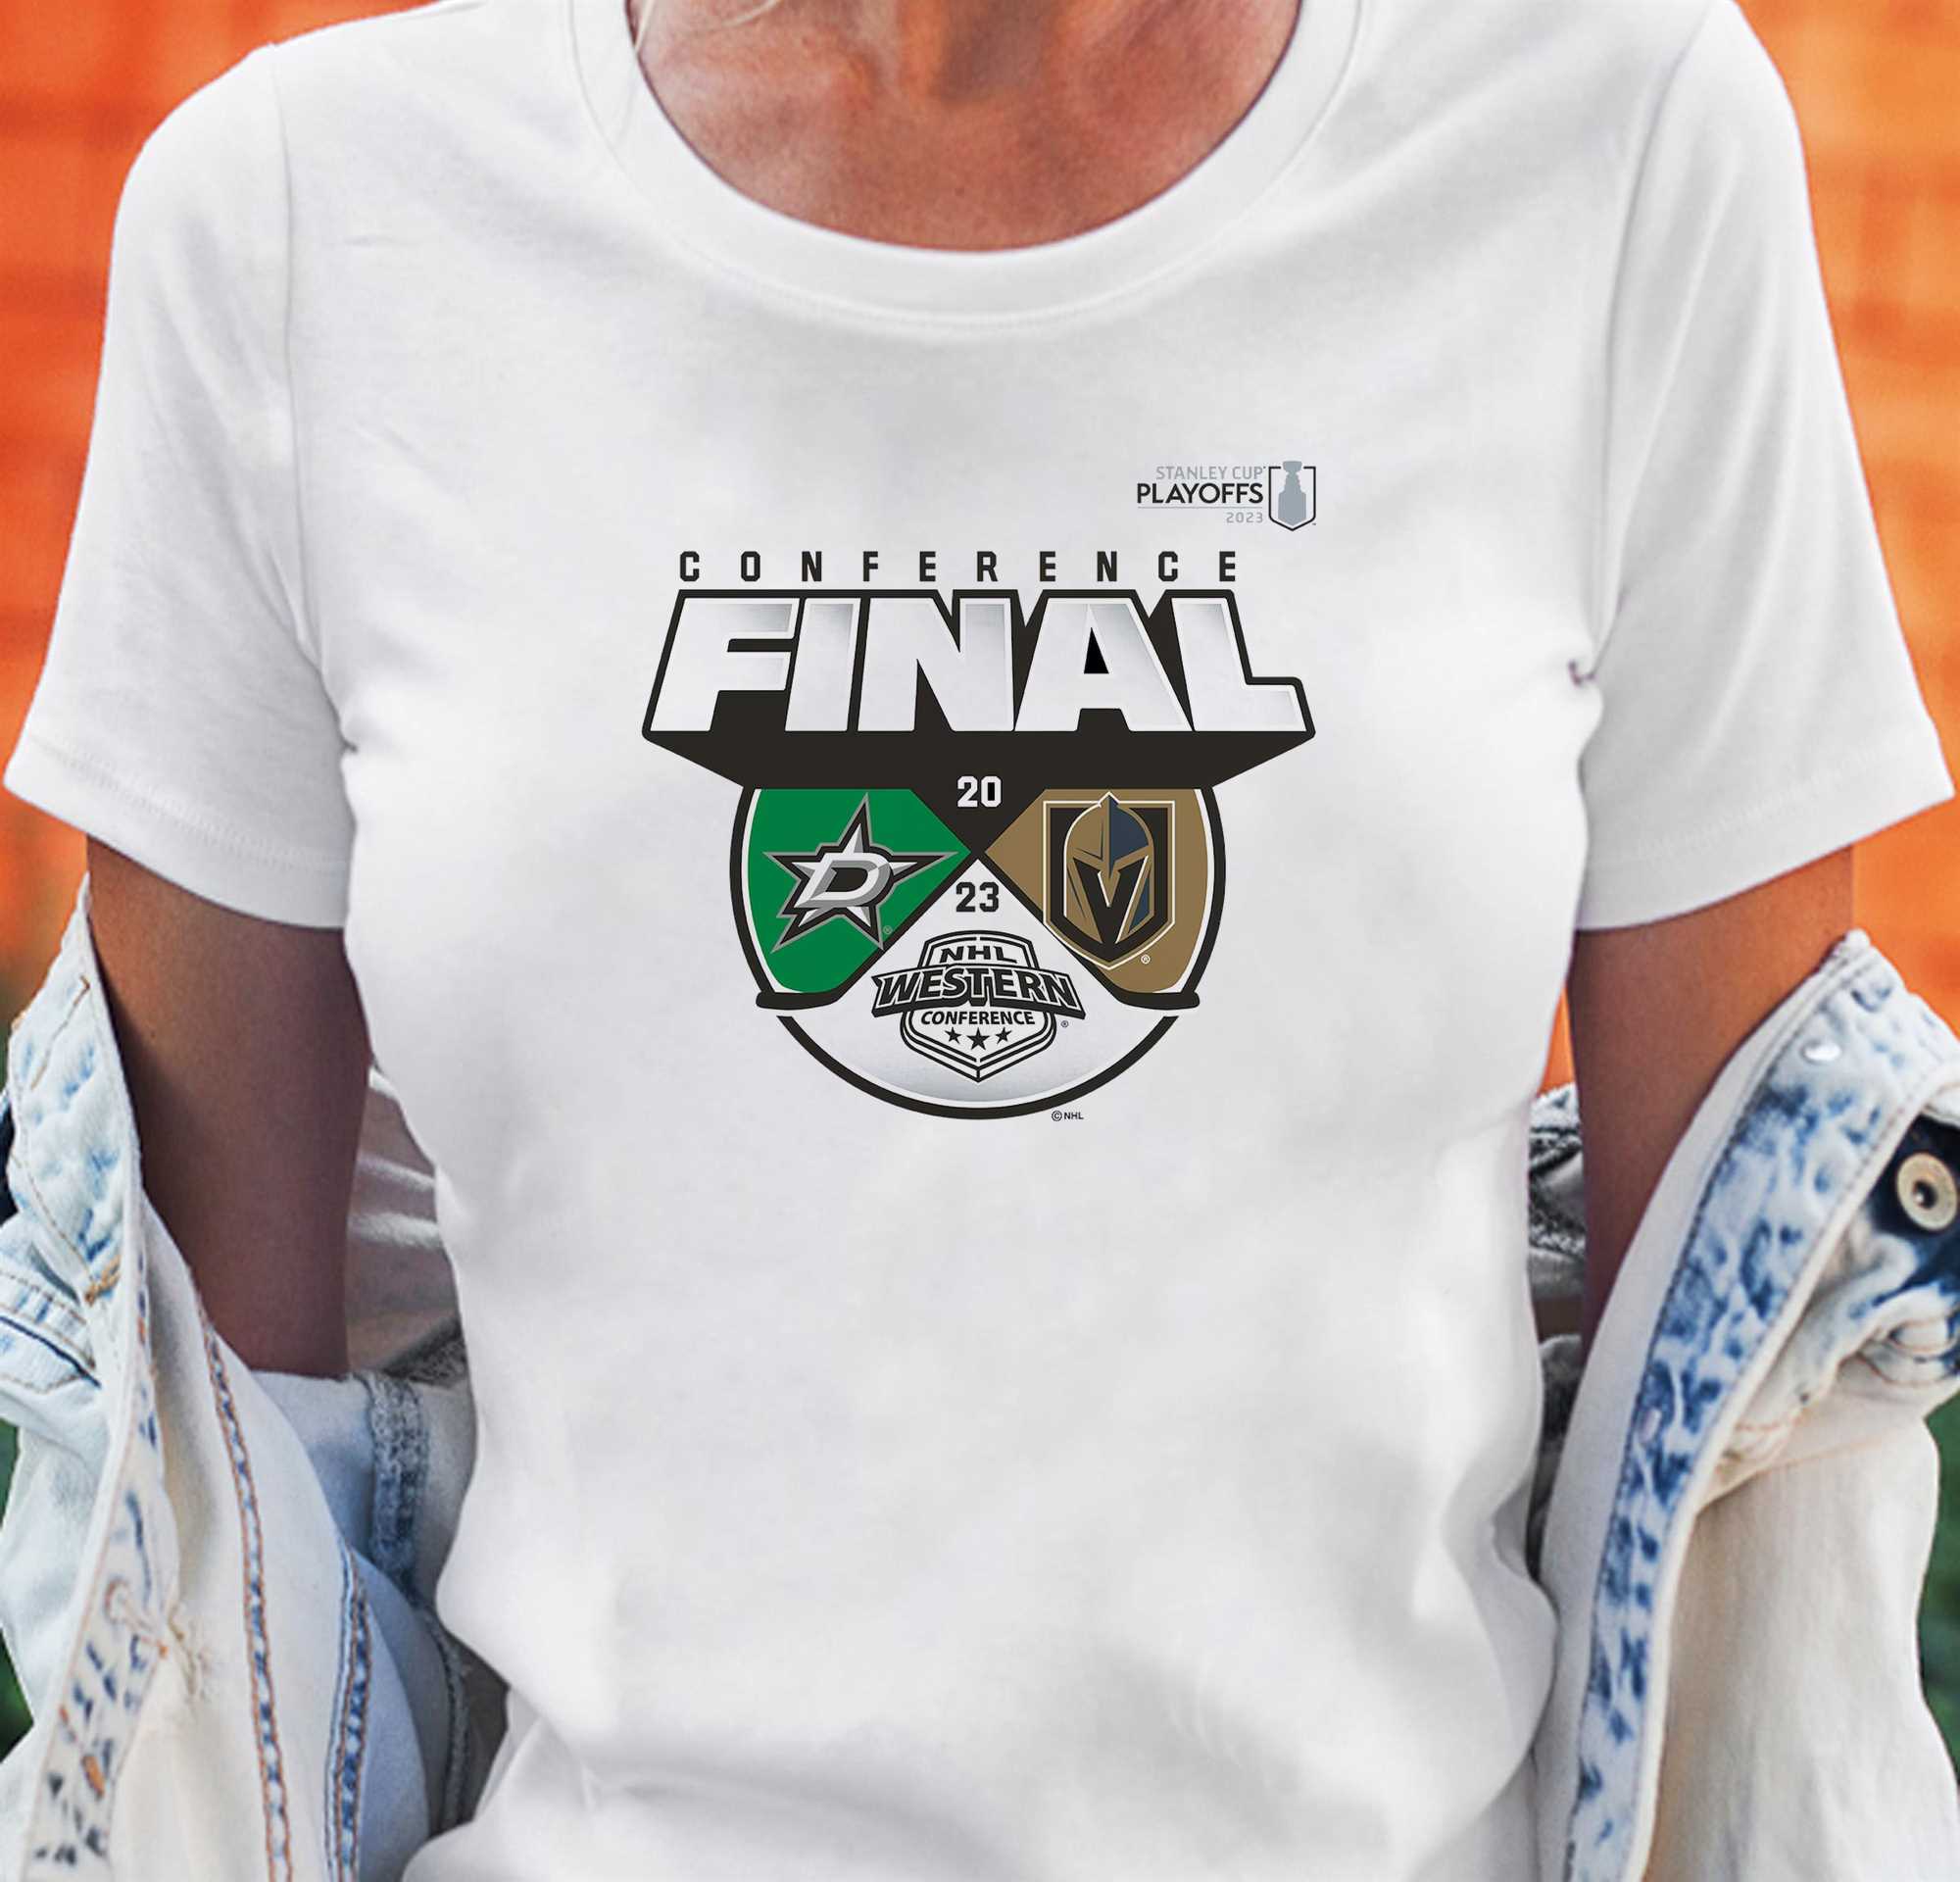 https://shibtee.com/wp-content/uploads/2023/05/vegas-golden-knights-vs-dallas-stars-2023-stanley-cup-western-conference-final-t-shirt-2.jpg